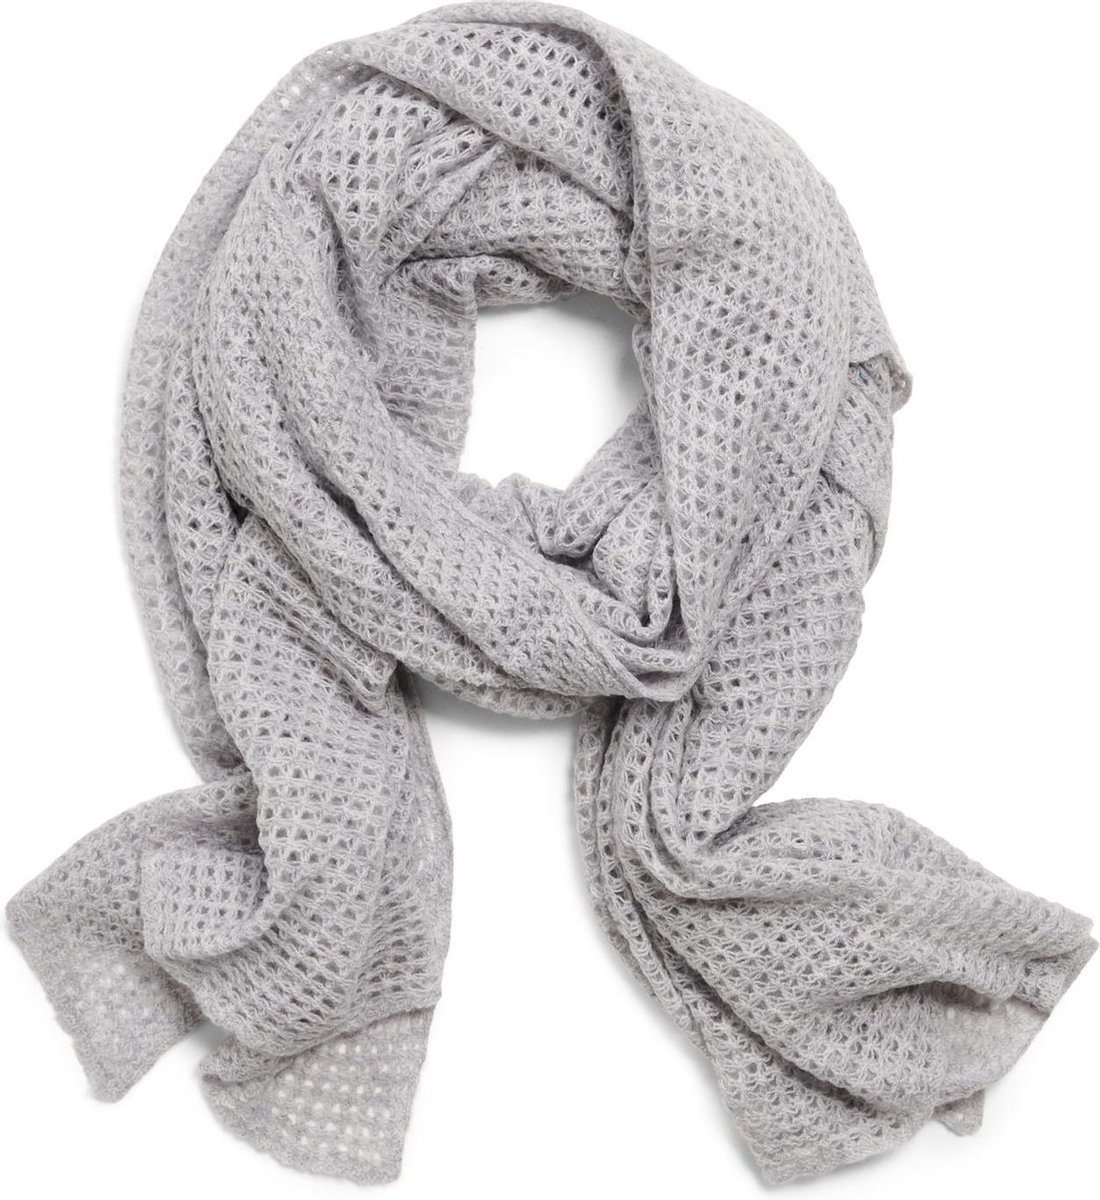 Cashmere and Scarves - Sjaal Anna - Husky Grey / Grijs - Samenstelling 90% Wool / 10% Cashmere